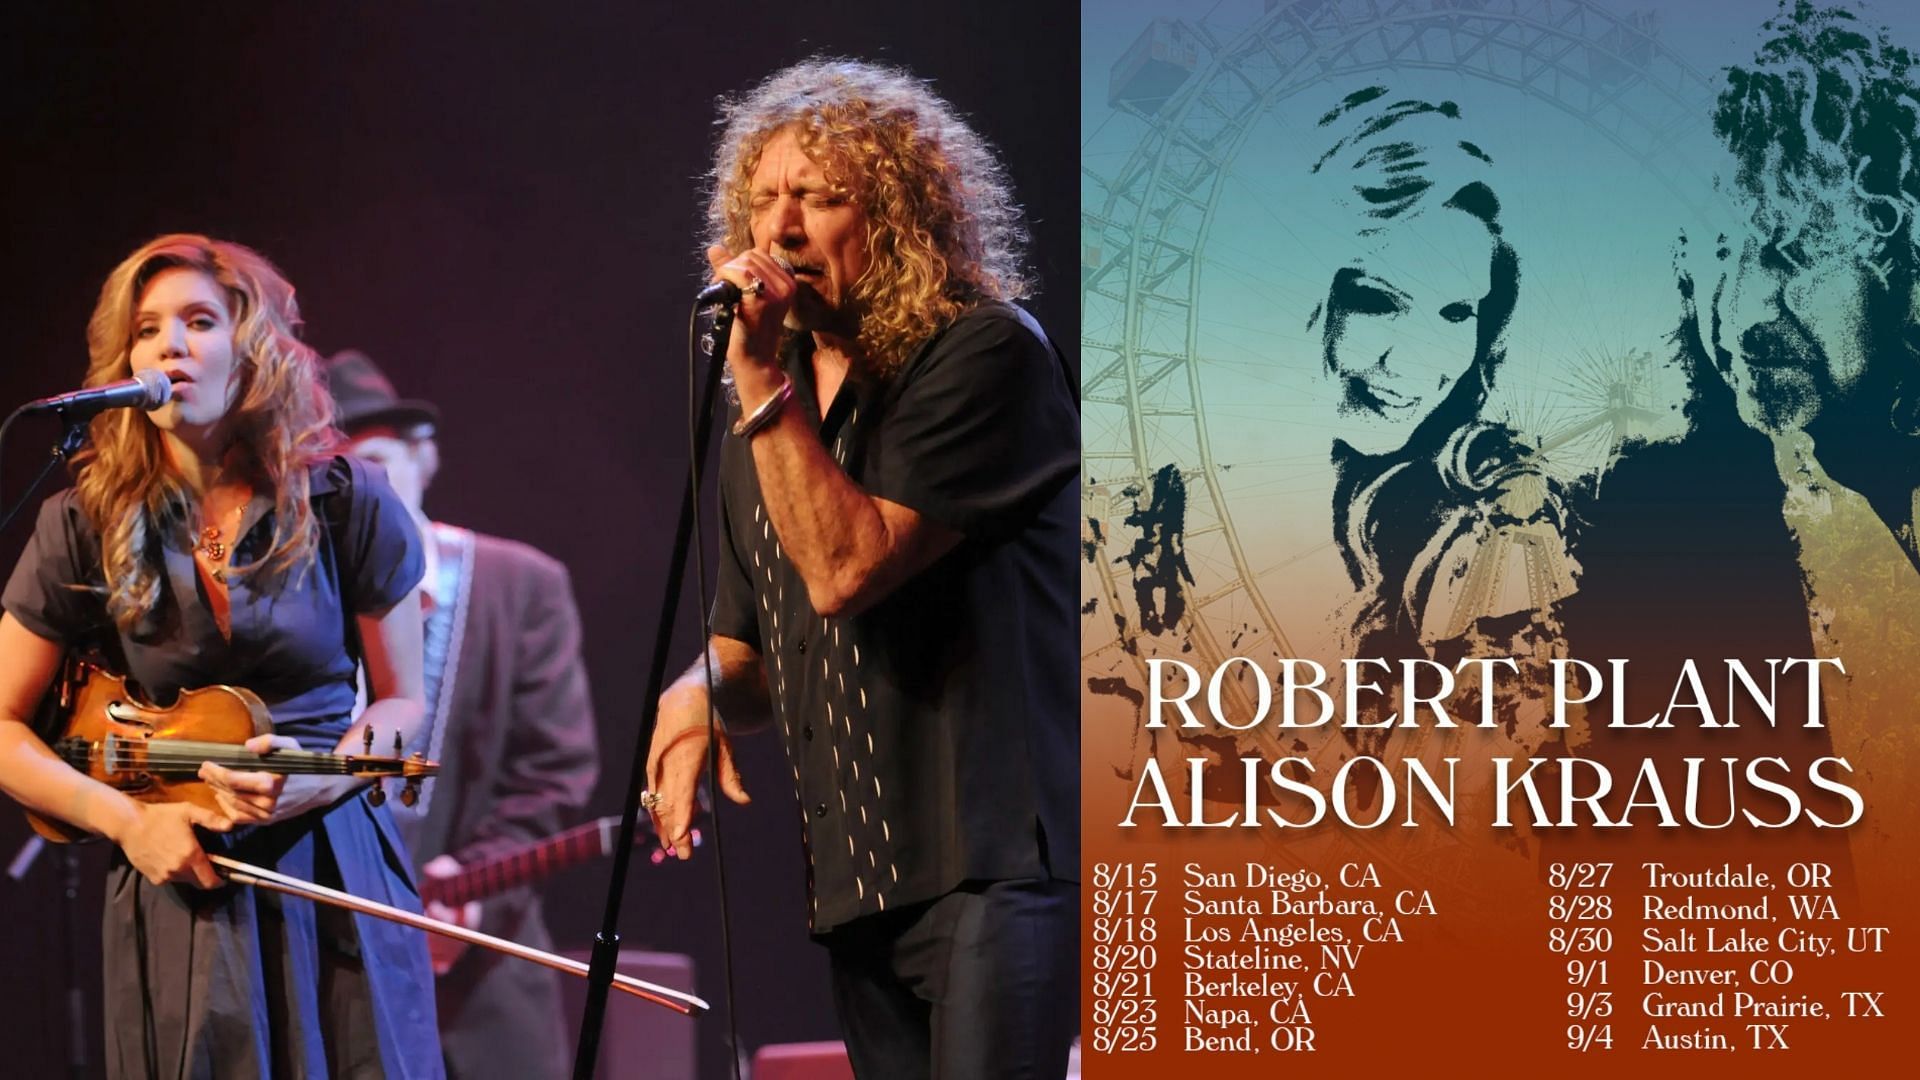 Robert Plant and Alice Krauss have announced a summer tour slated for June. (Image via Kevin Mazur/Getty)